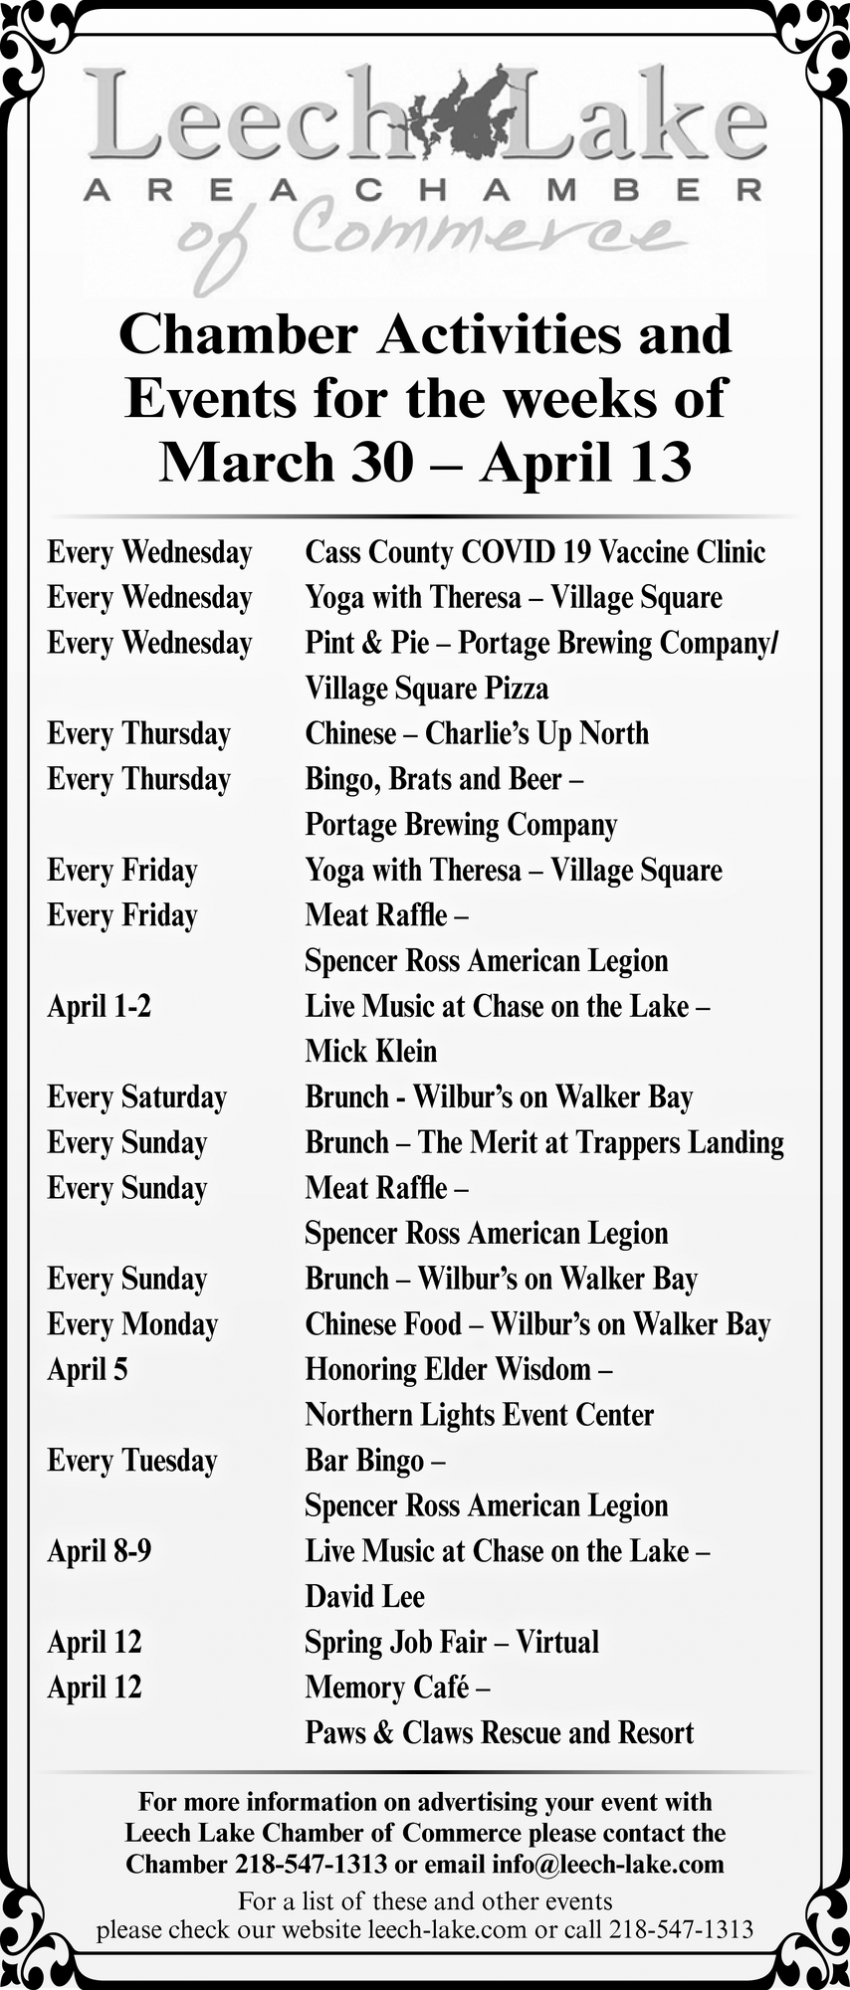 Chamber Activities And Events For The Weeks Of March 16 - March 30